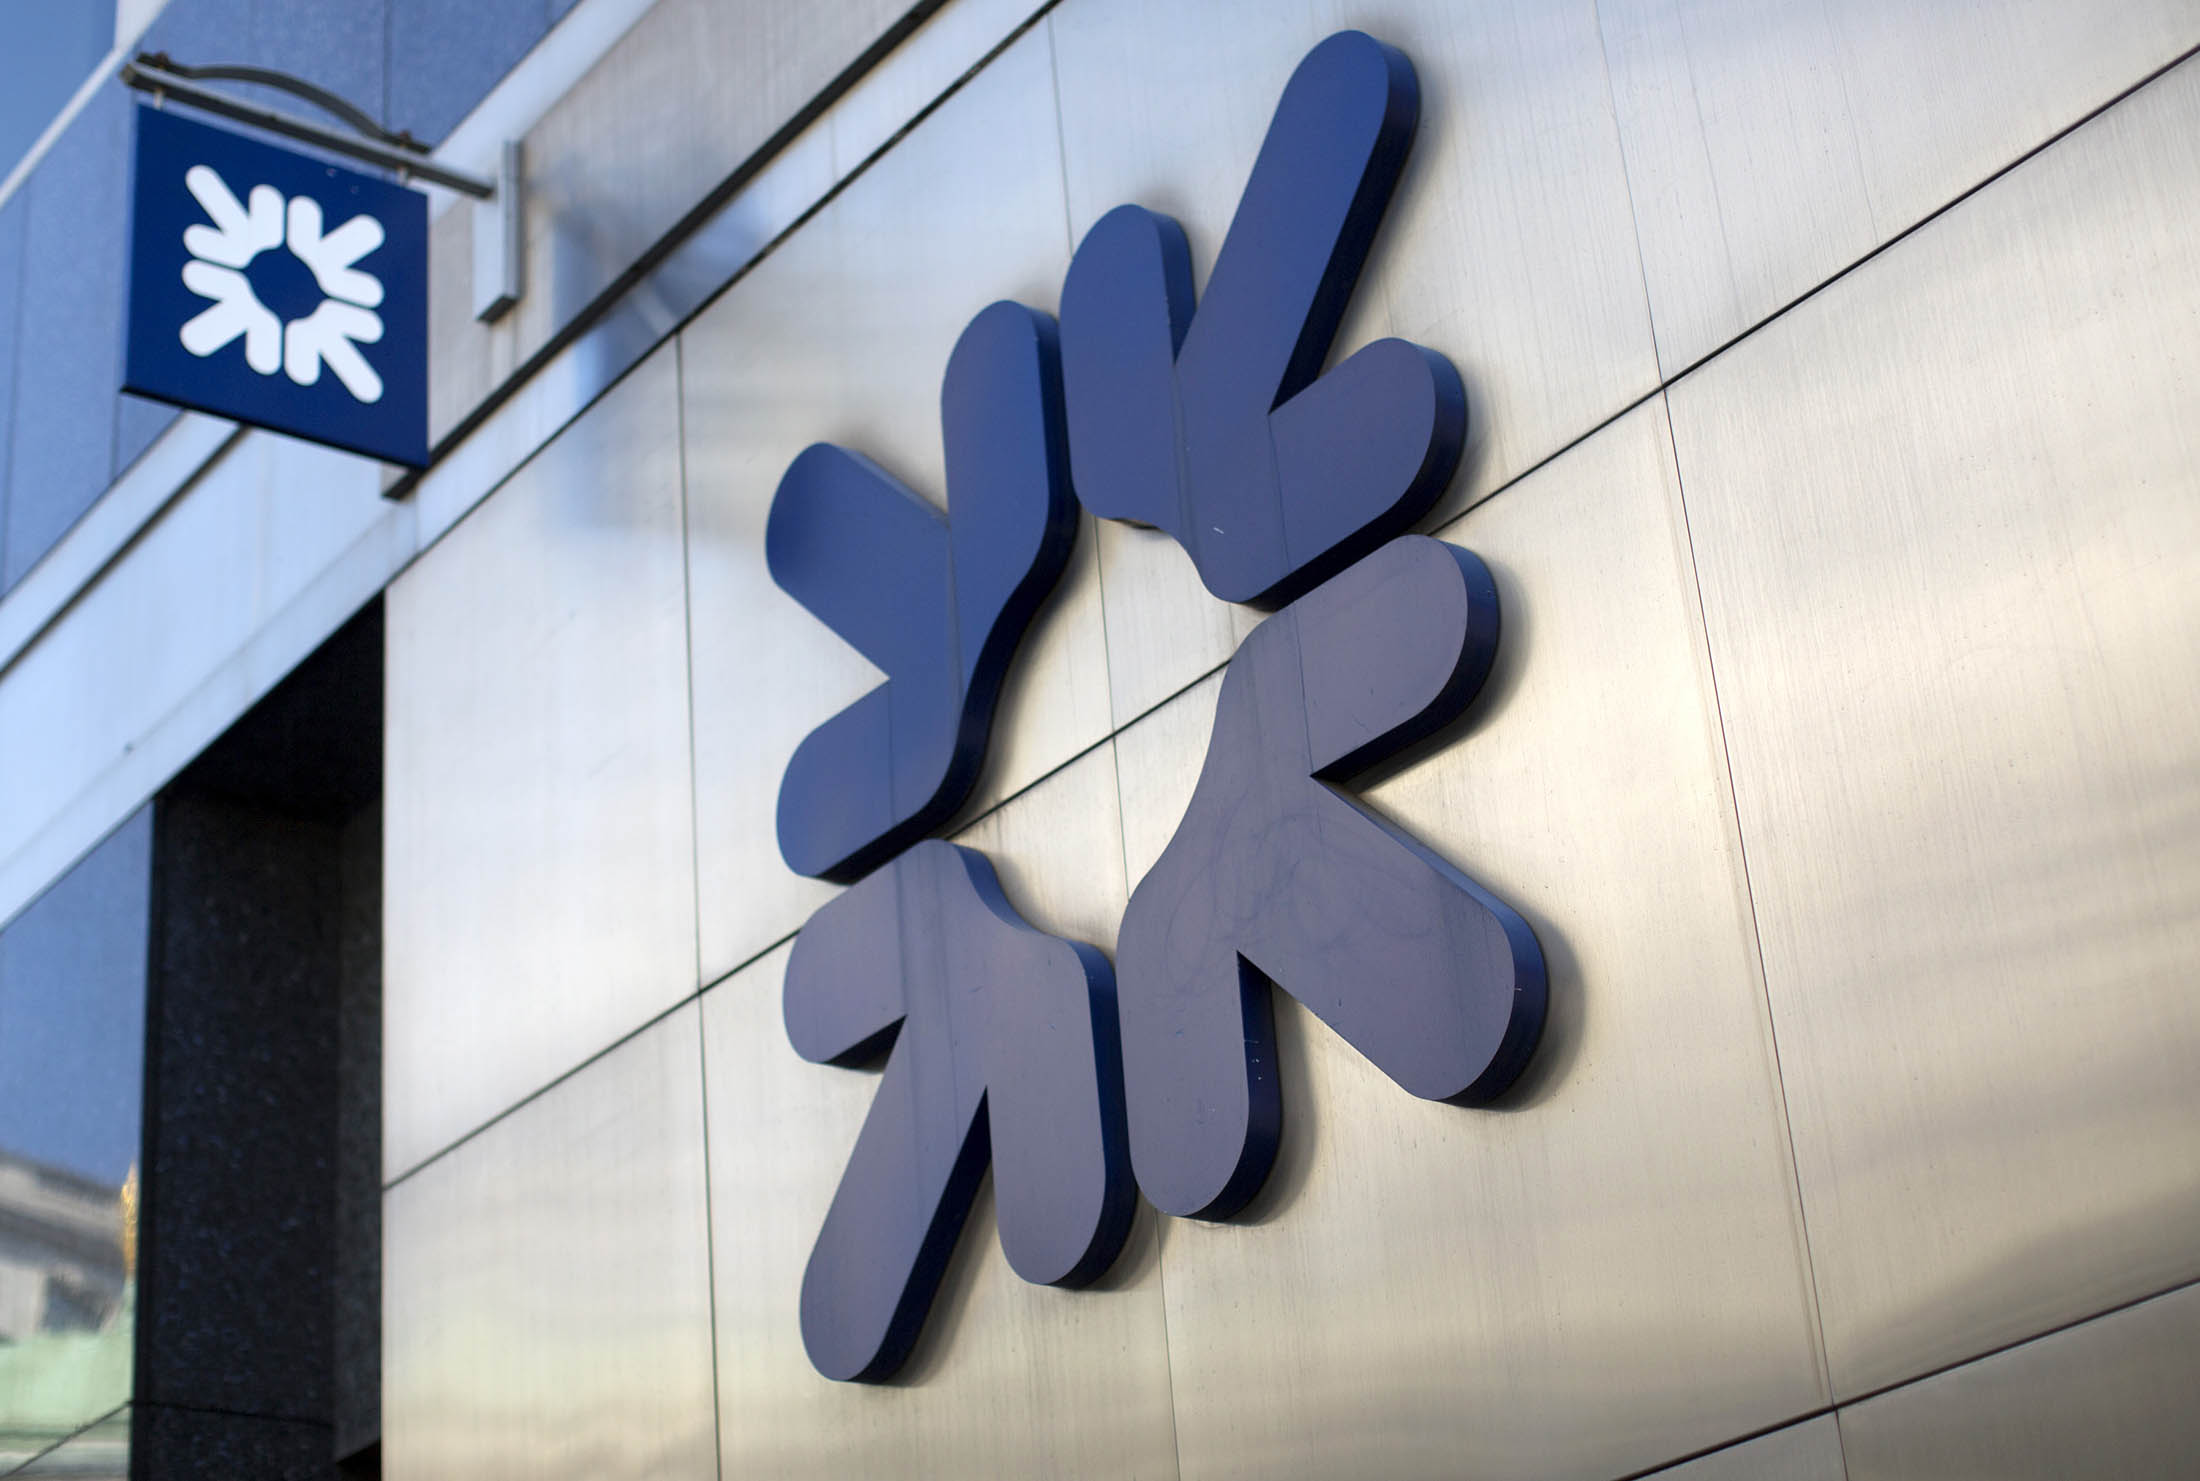 An RBS logo sits outside a Royal Bank of Scotland Plc (RBS) bank branch in London, U.K., on Thursday, June 11, 2015. Chancellor of the Exchequer George Osborne said he'll start returning Royal Bank of Scotland Group Plc to private ownership in the coming months, even though it may cause a loss for U.K. taxpayers.
